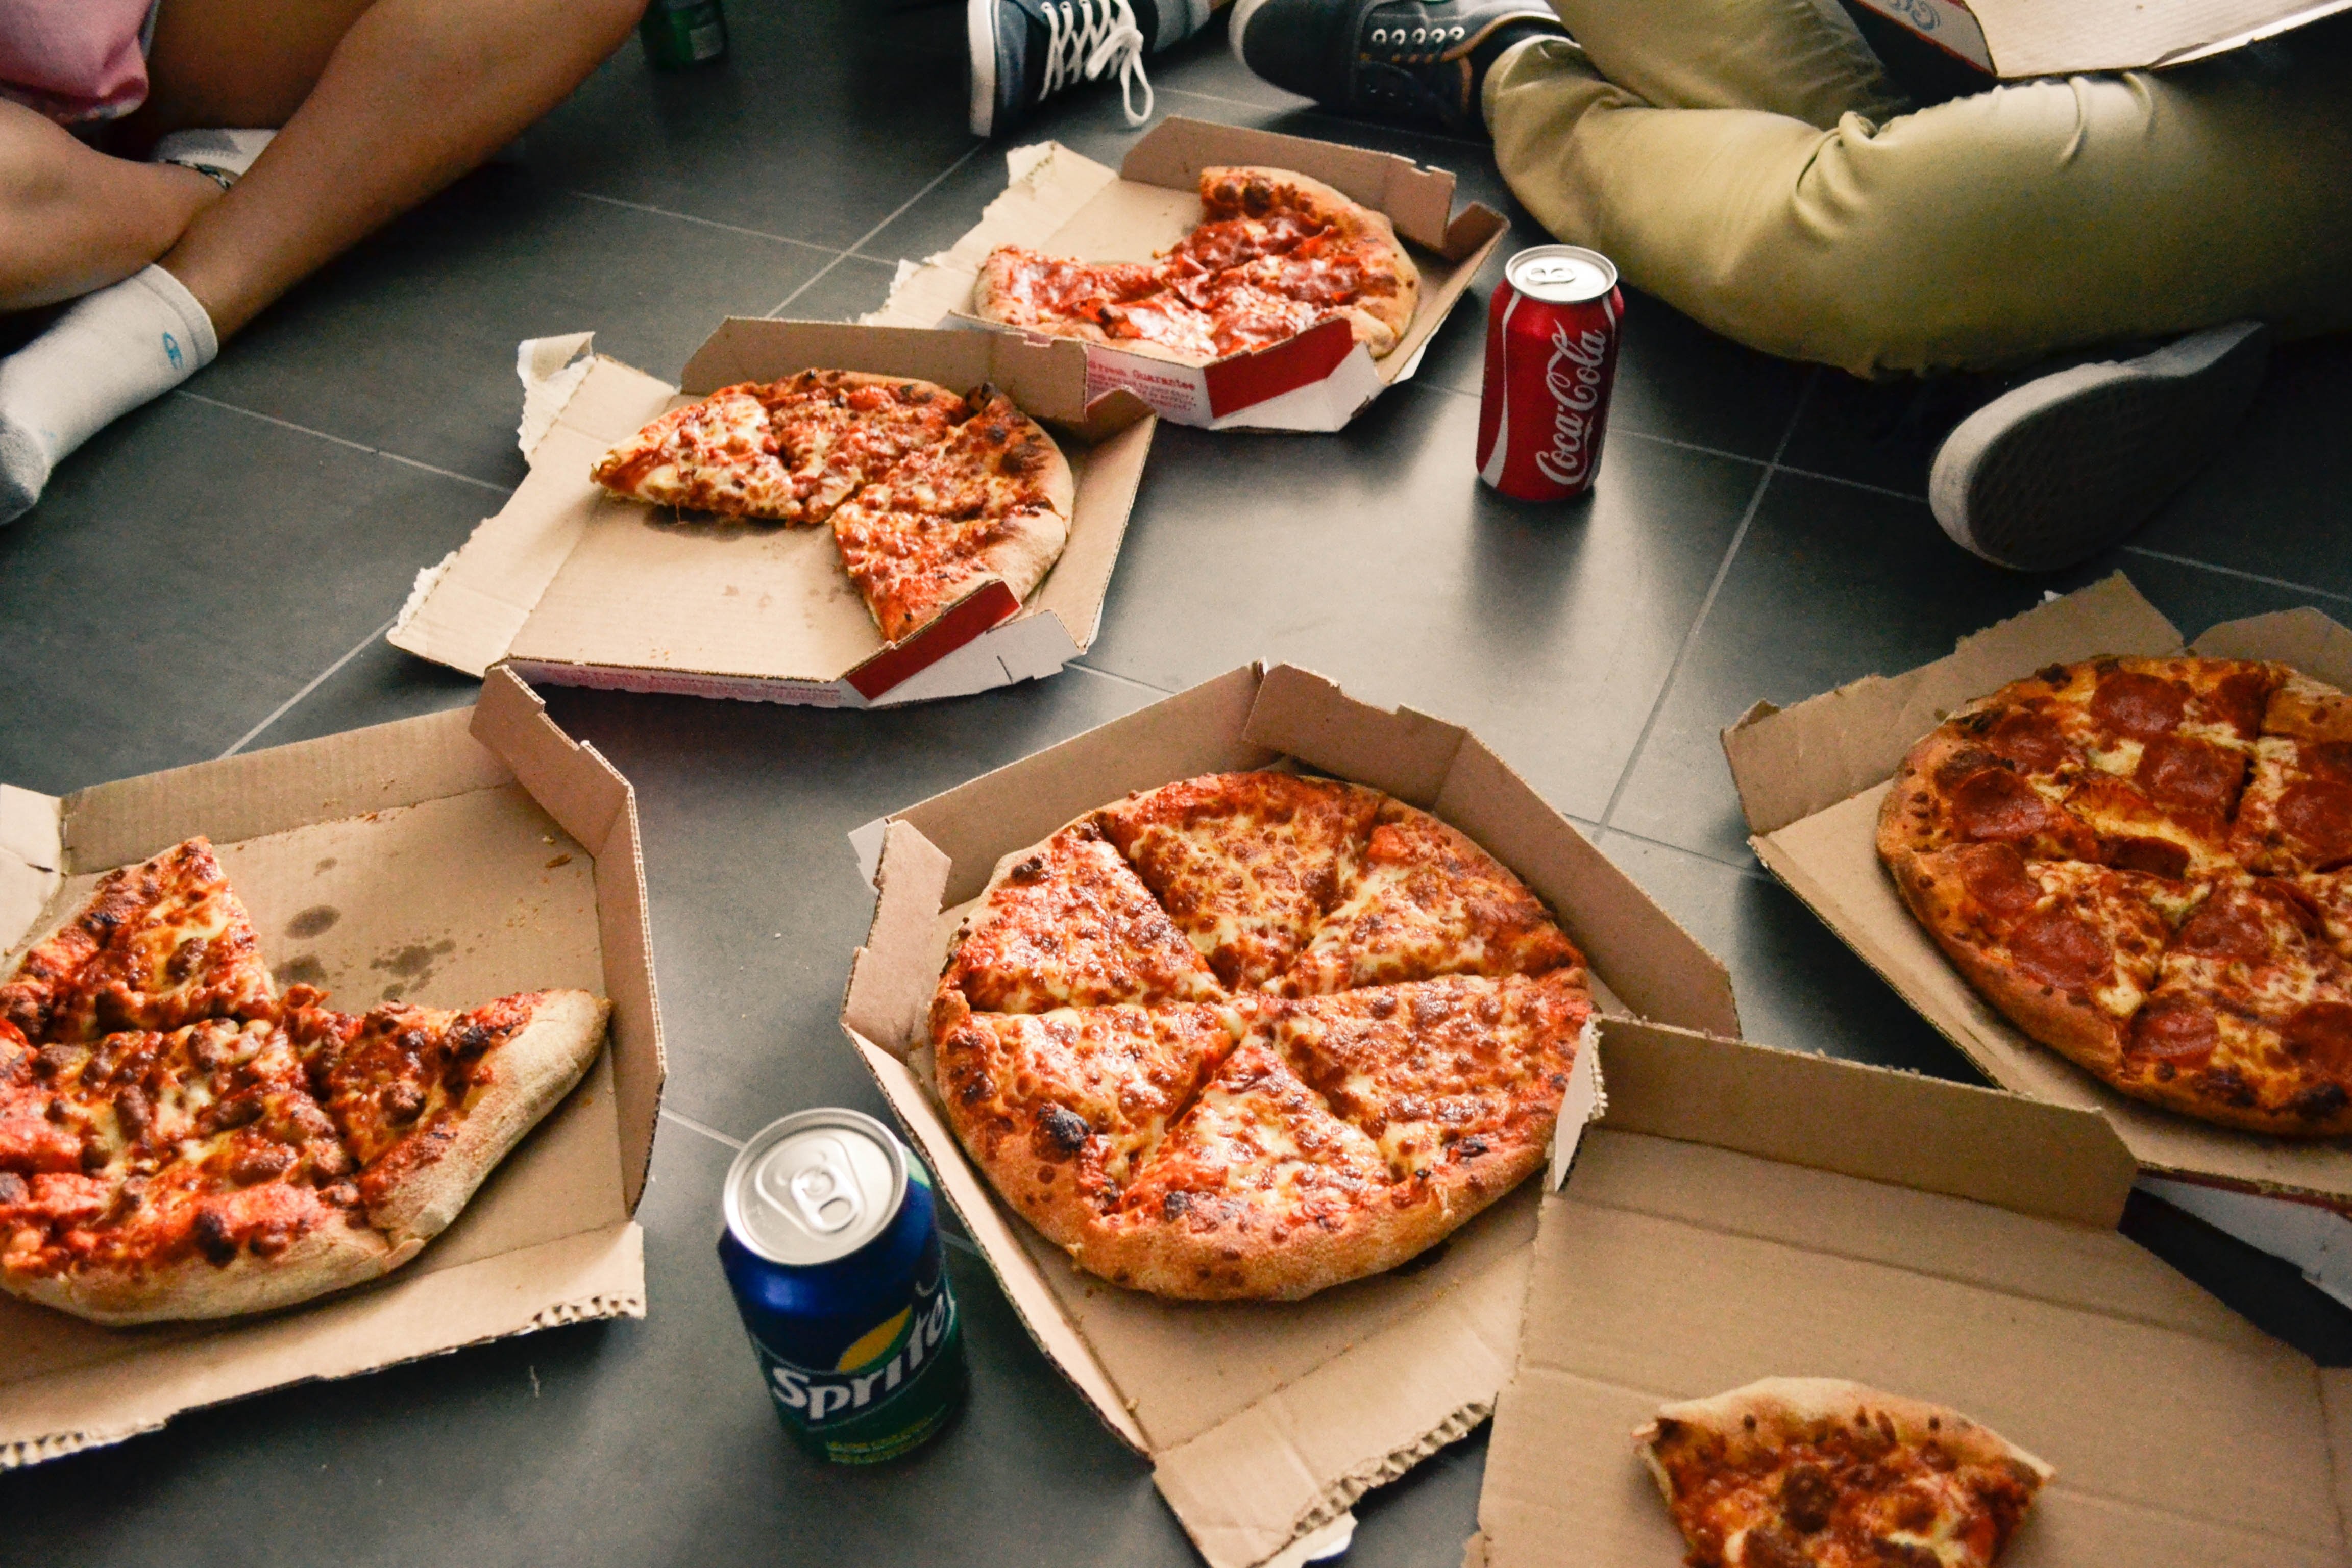 Pizza Hut shares: 5 ways to build and cultivate a goals-oriented team